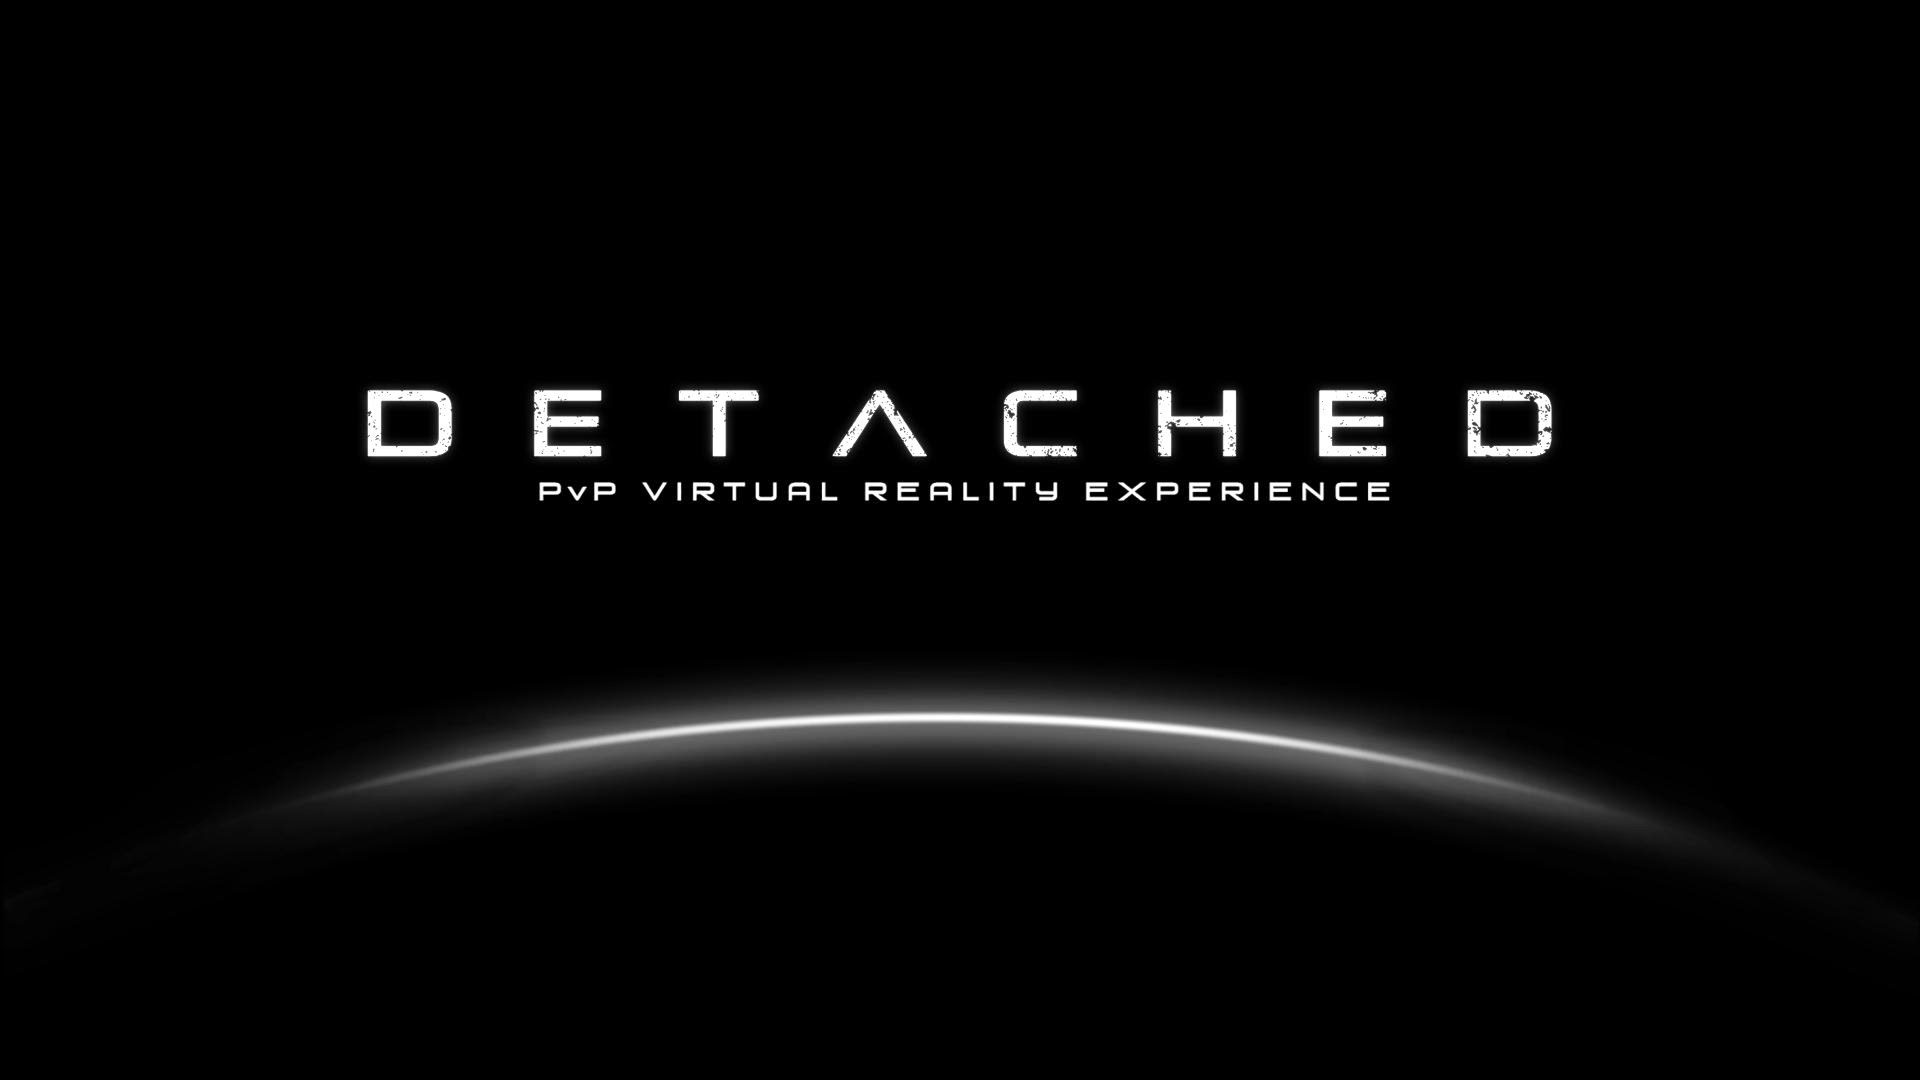 Detached on Oculus Rift, Impressions and Review